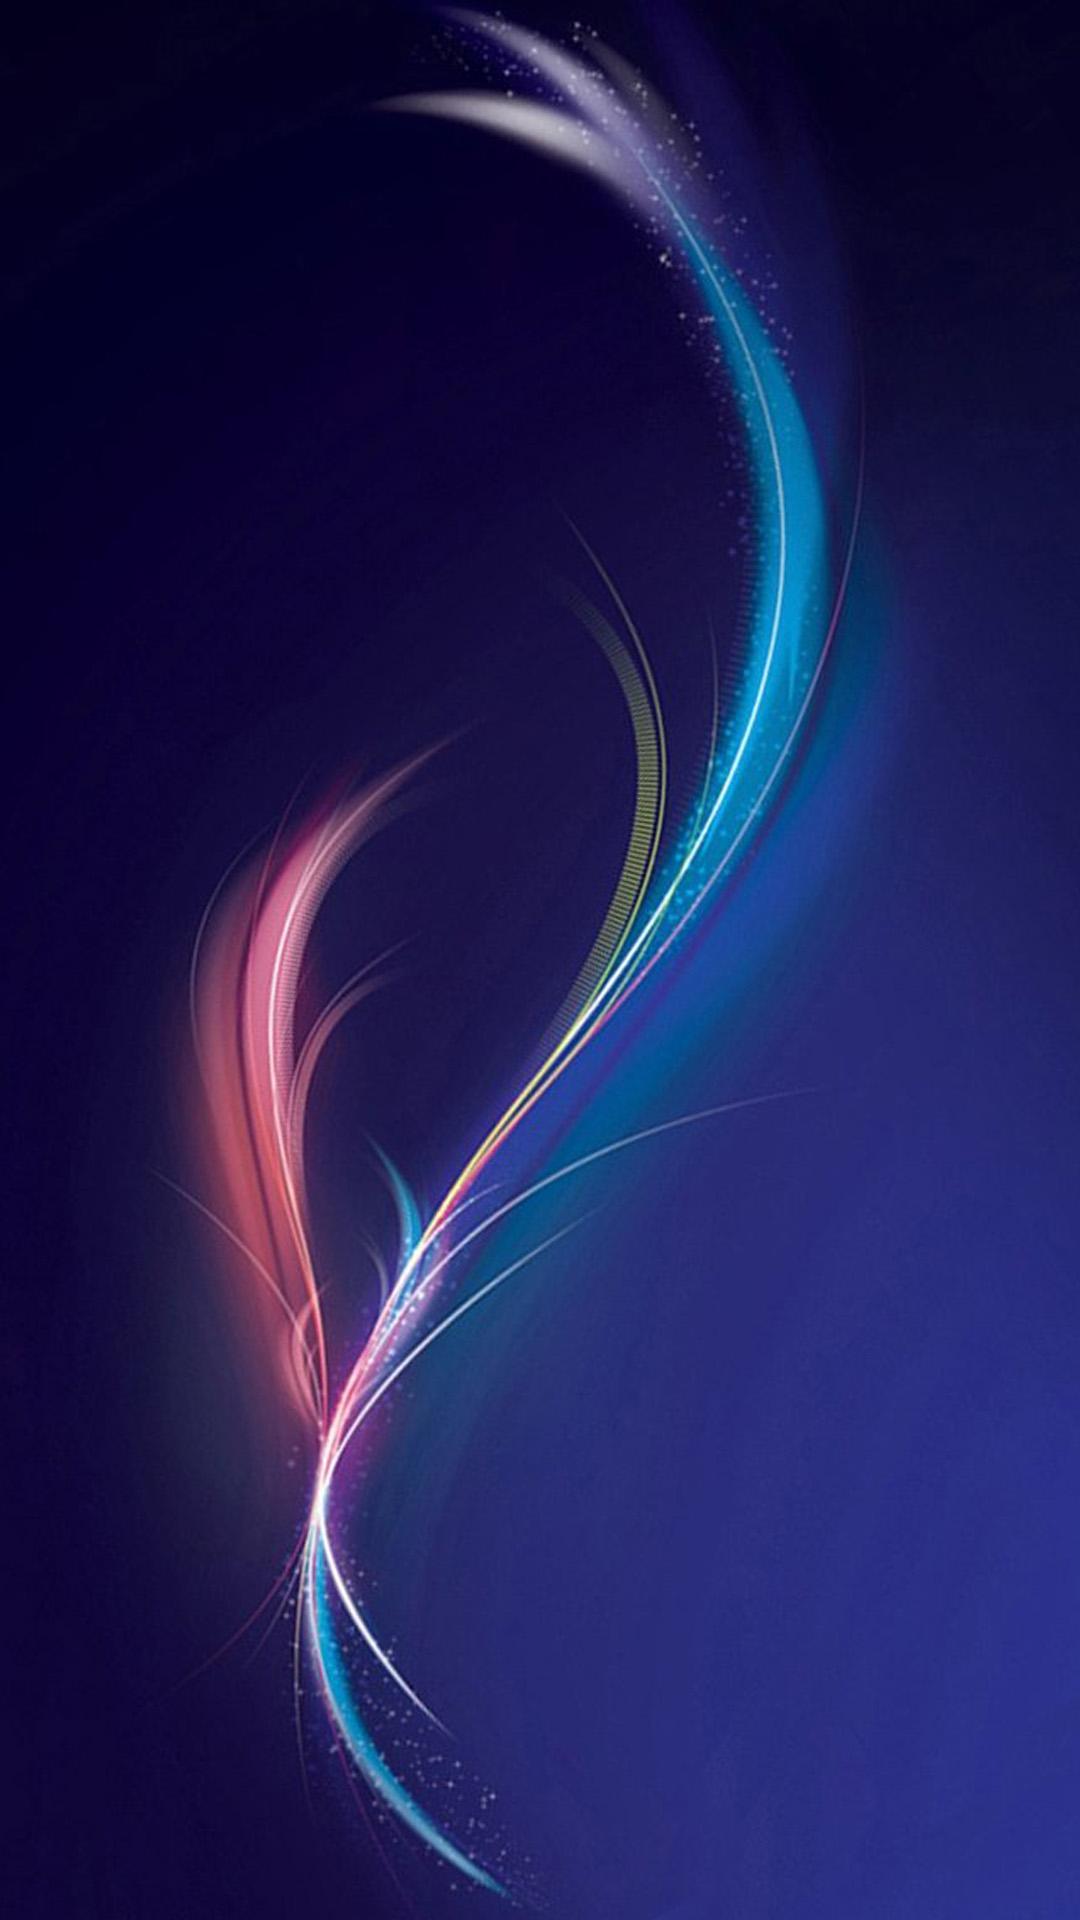 1080 x 1920 · jpeg - Android Nokia Wallpapers - Wallpaper Cave